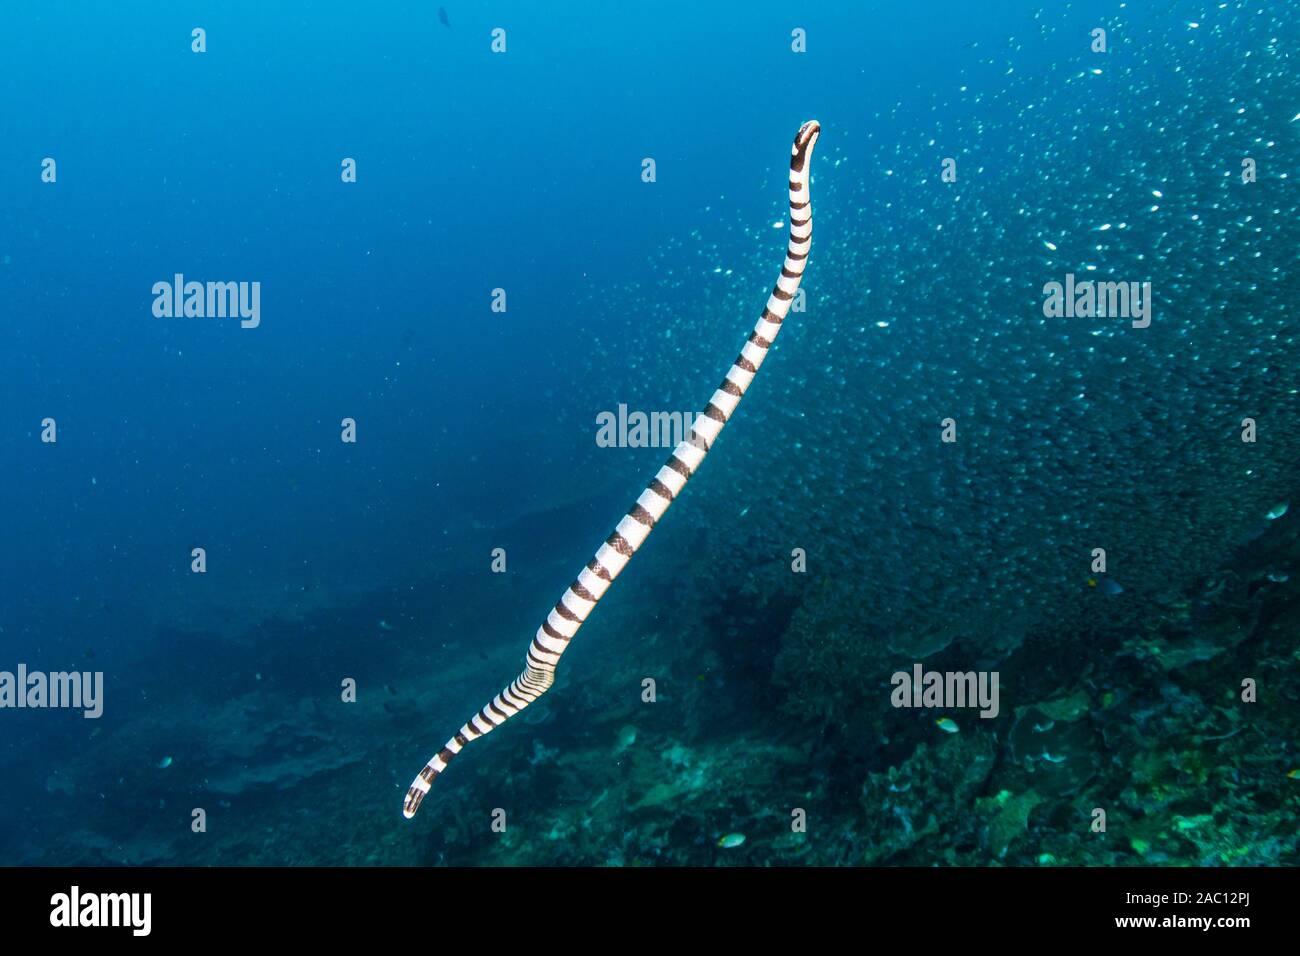 Banded Sea Snake swimming on a tropical coral reef at dusk Stock Photo